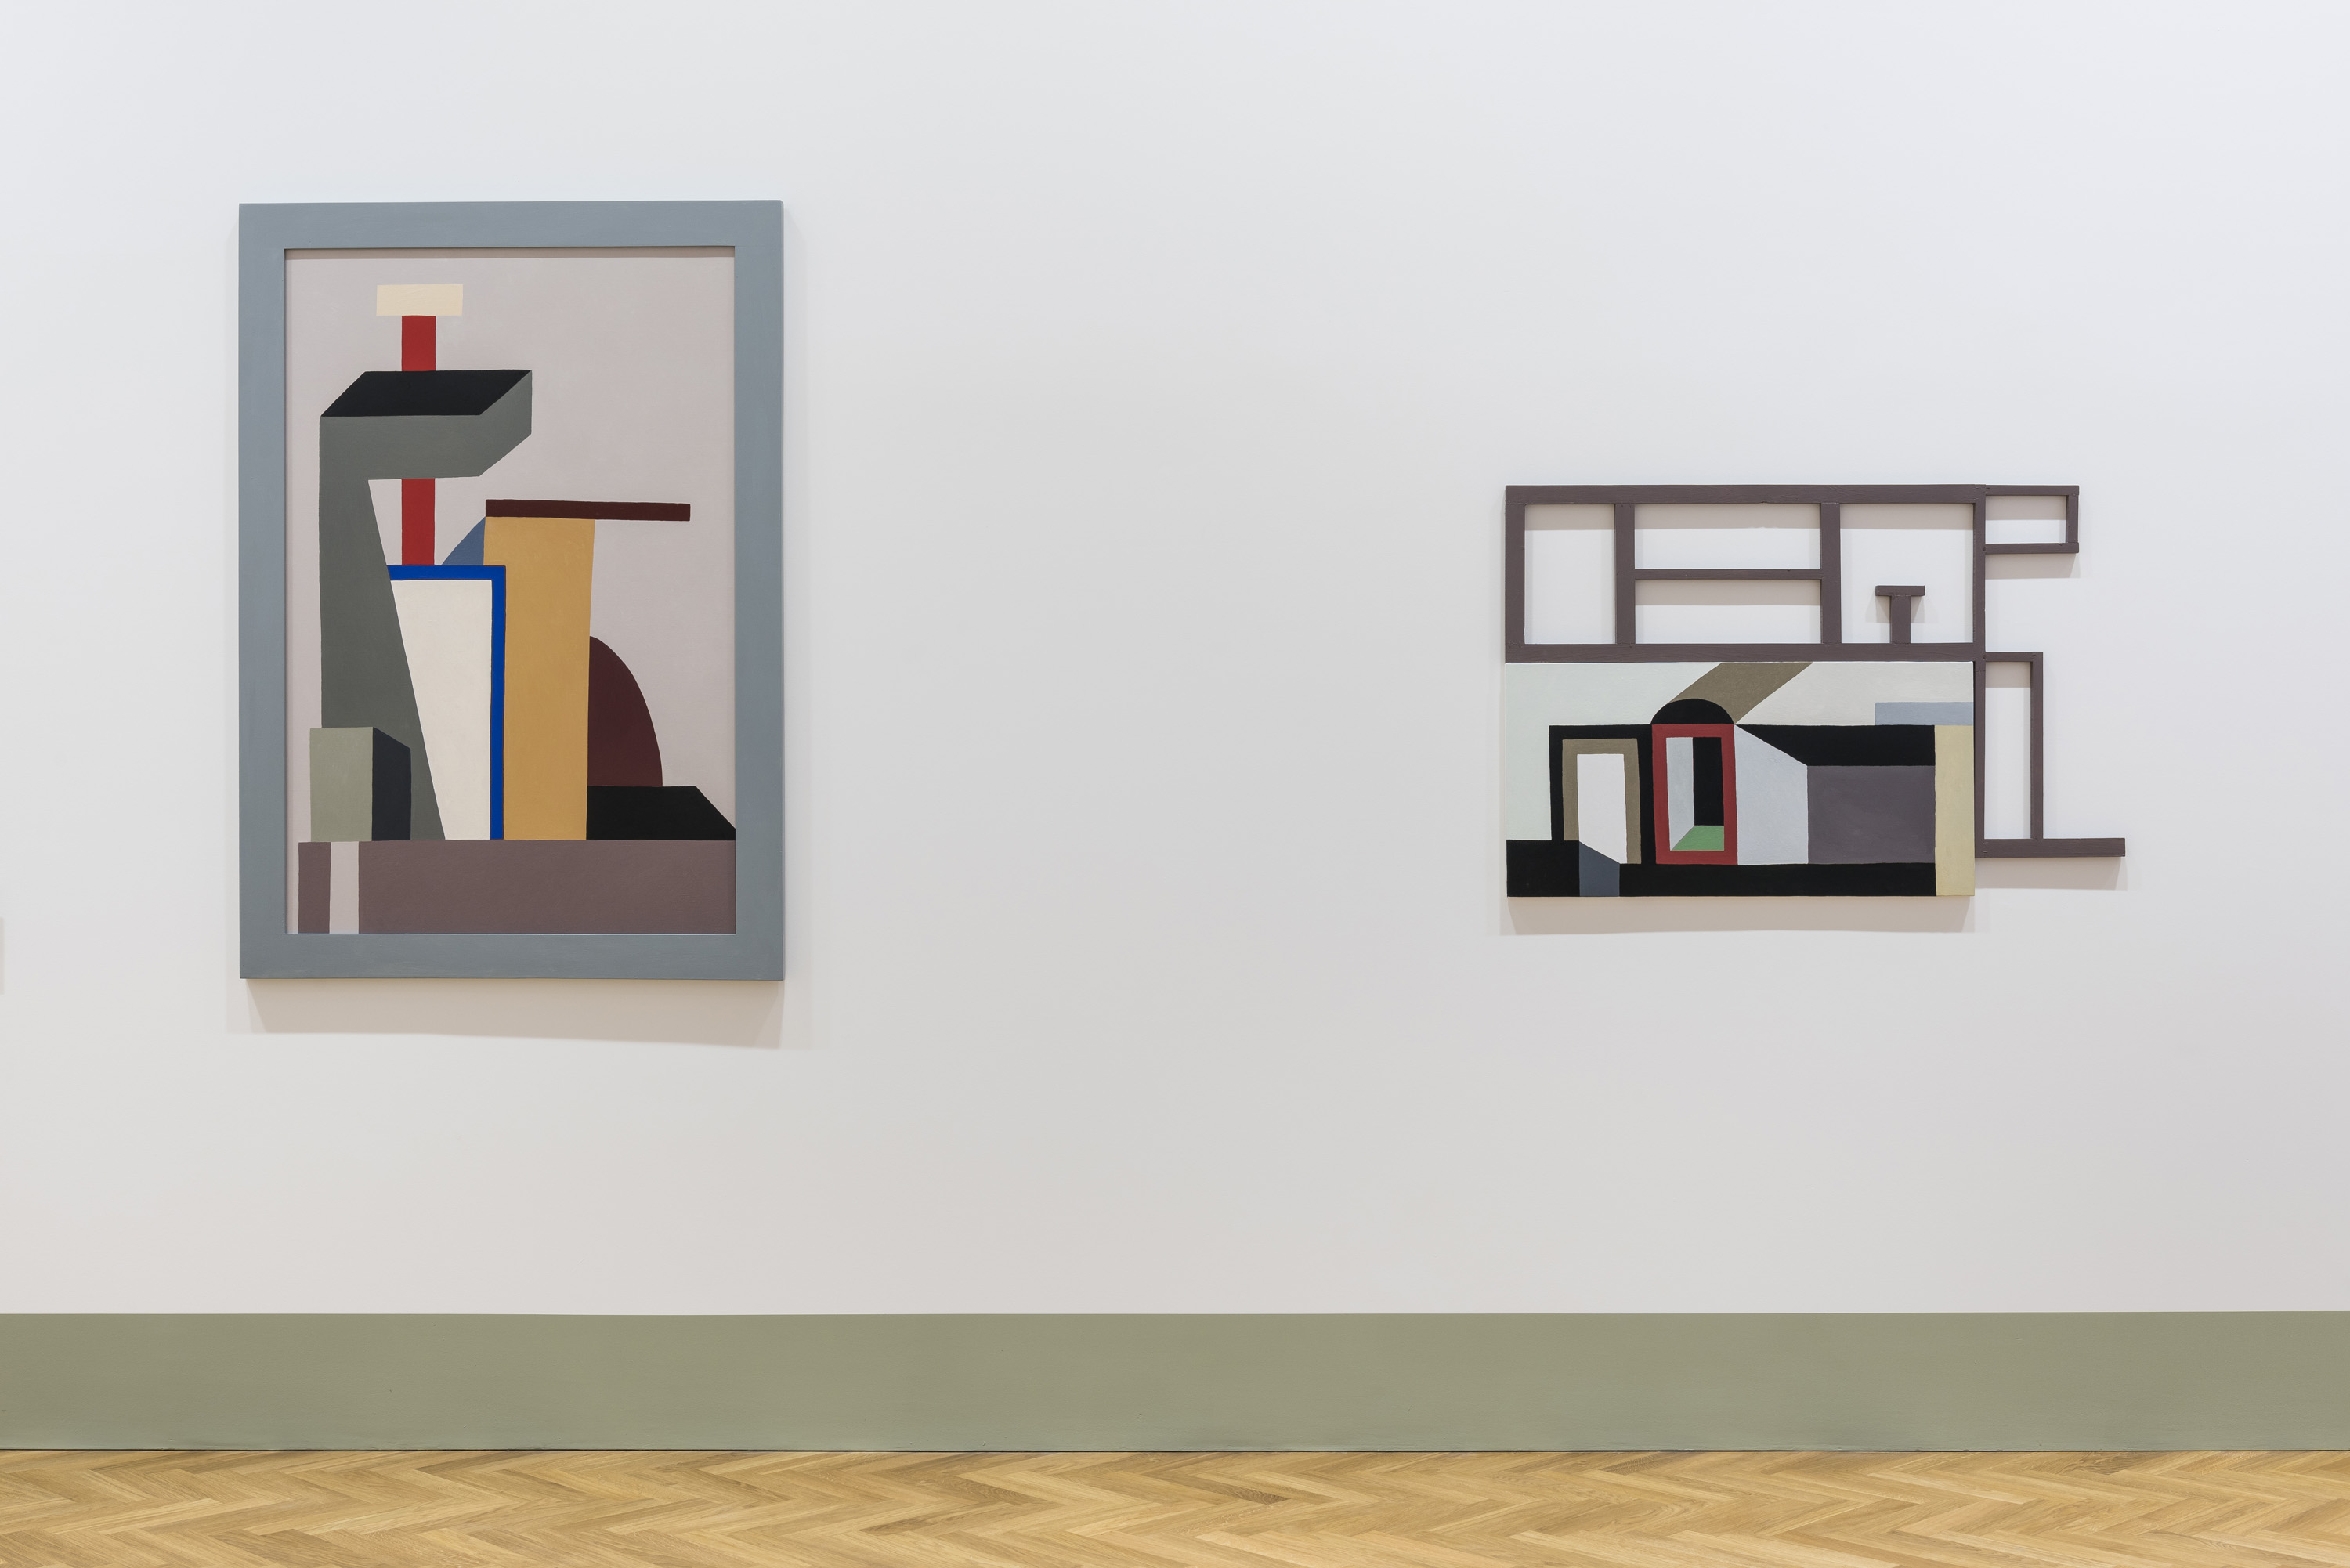 An installation view of Nathalie Du Pasquier's new exhibition at Pace in London. Copyright Nathalie Du Pasquier, Courtesy Pace Gallery